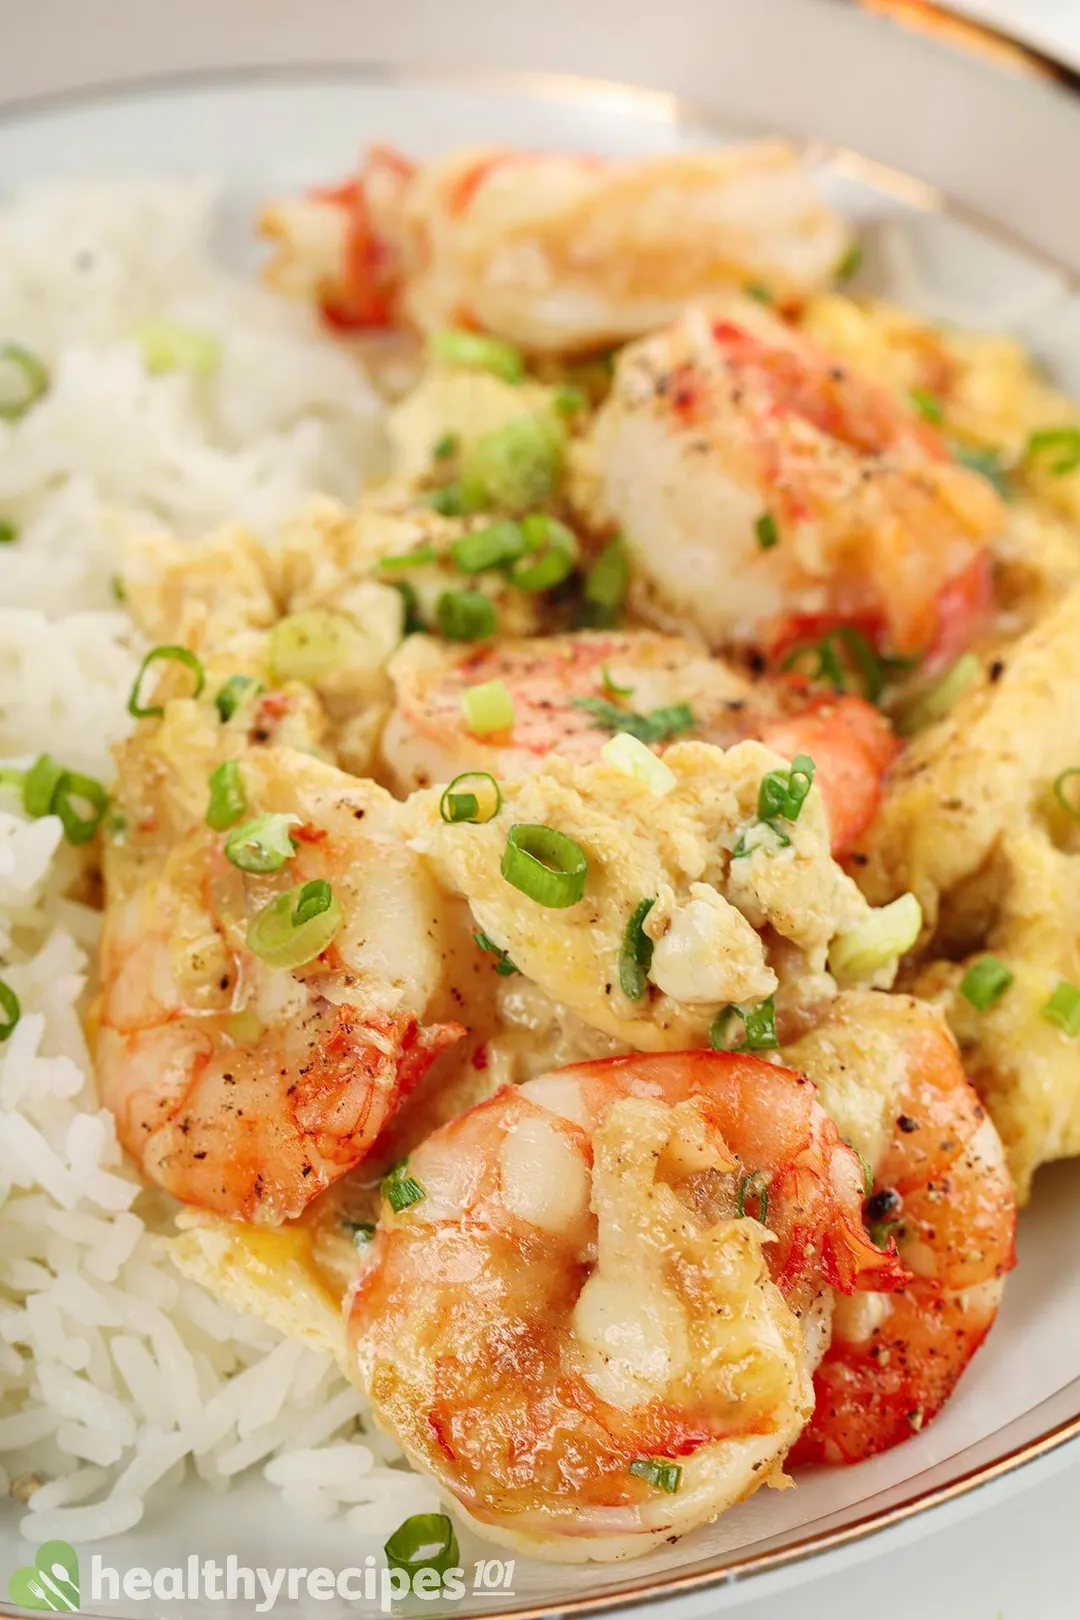 Is This Shrimp and Egg Recipe Healthy